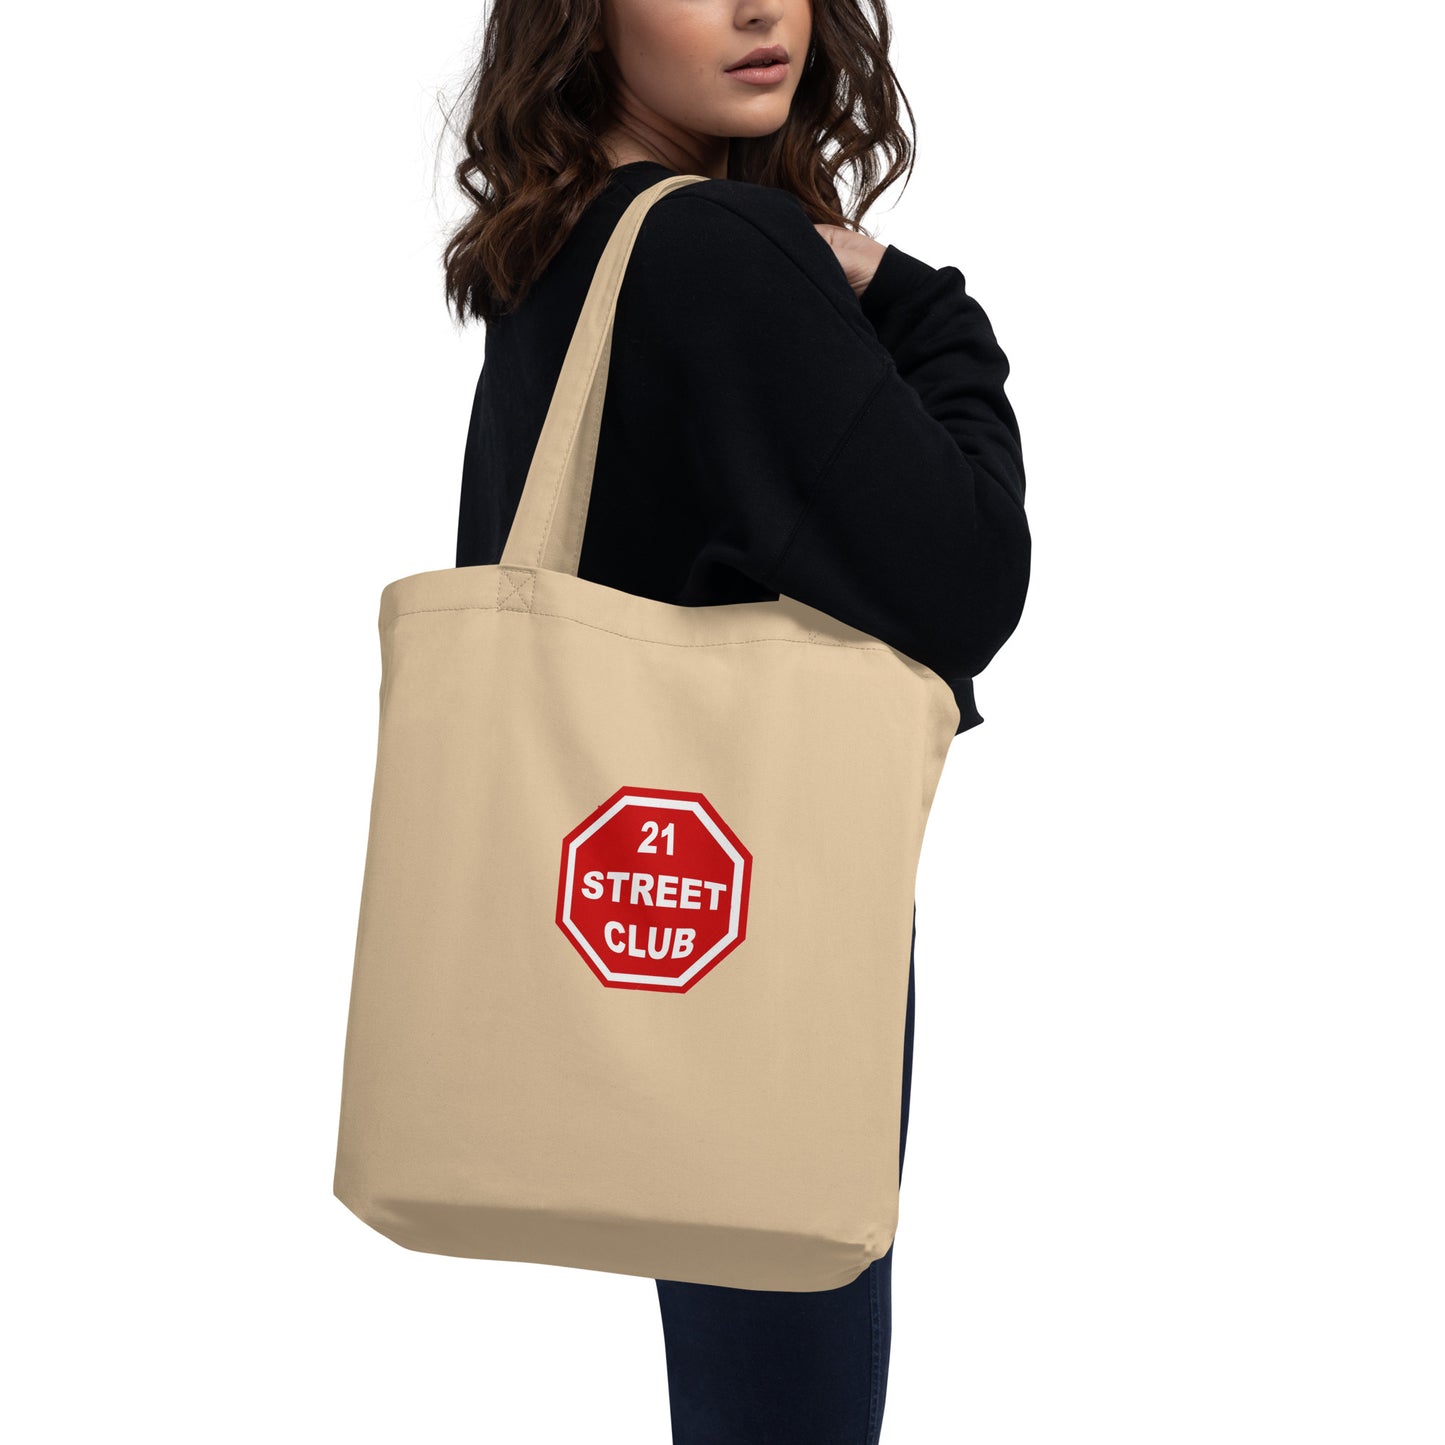 'Dilemma' Eco Tote bag by Isabella Mignot